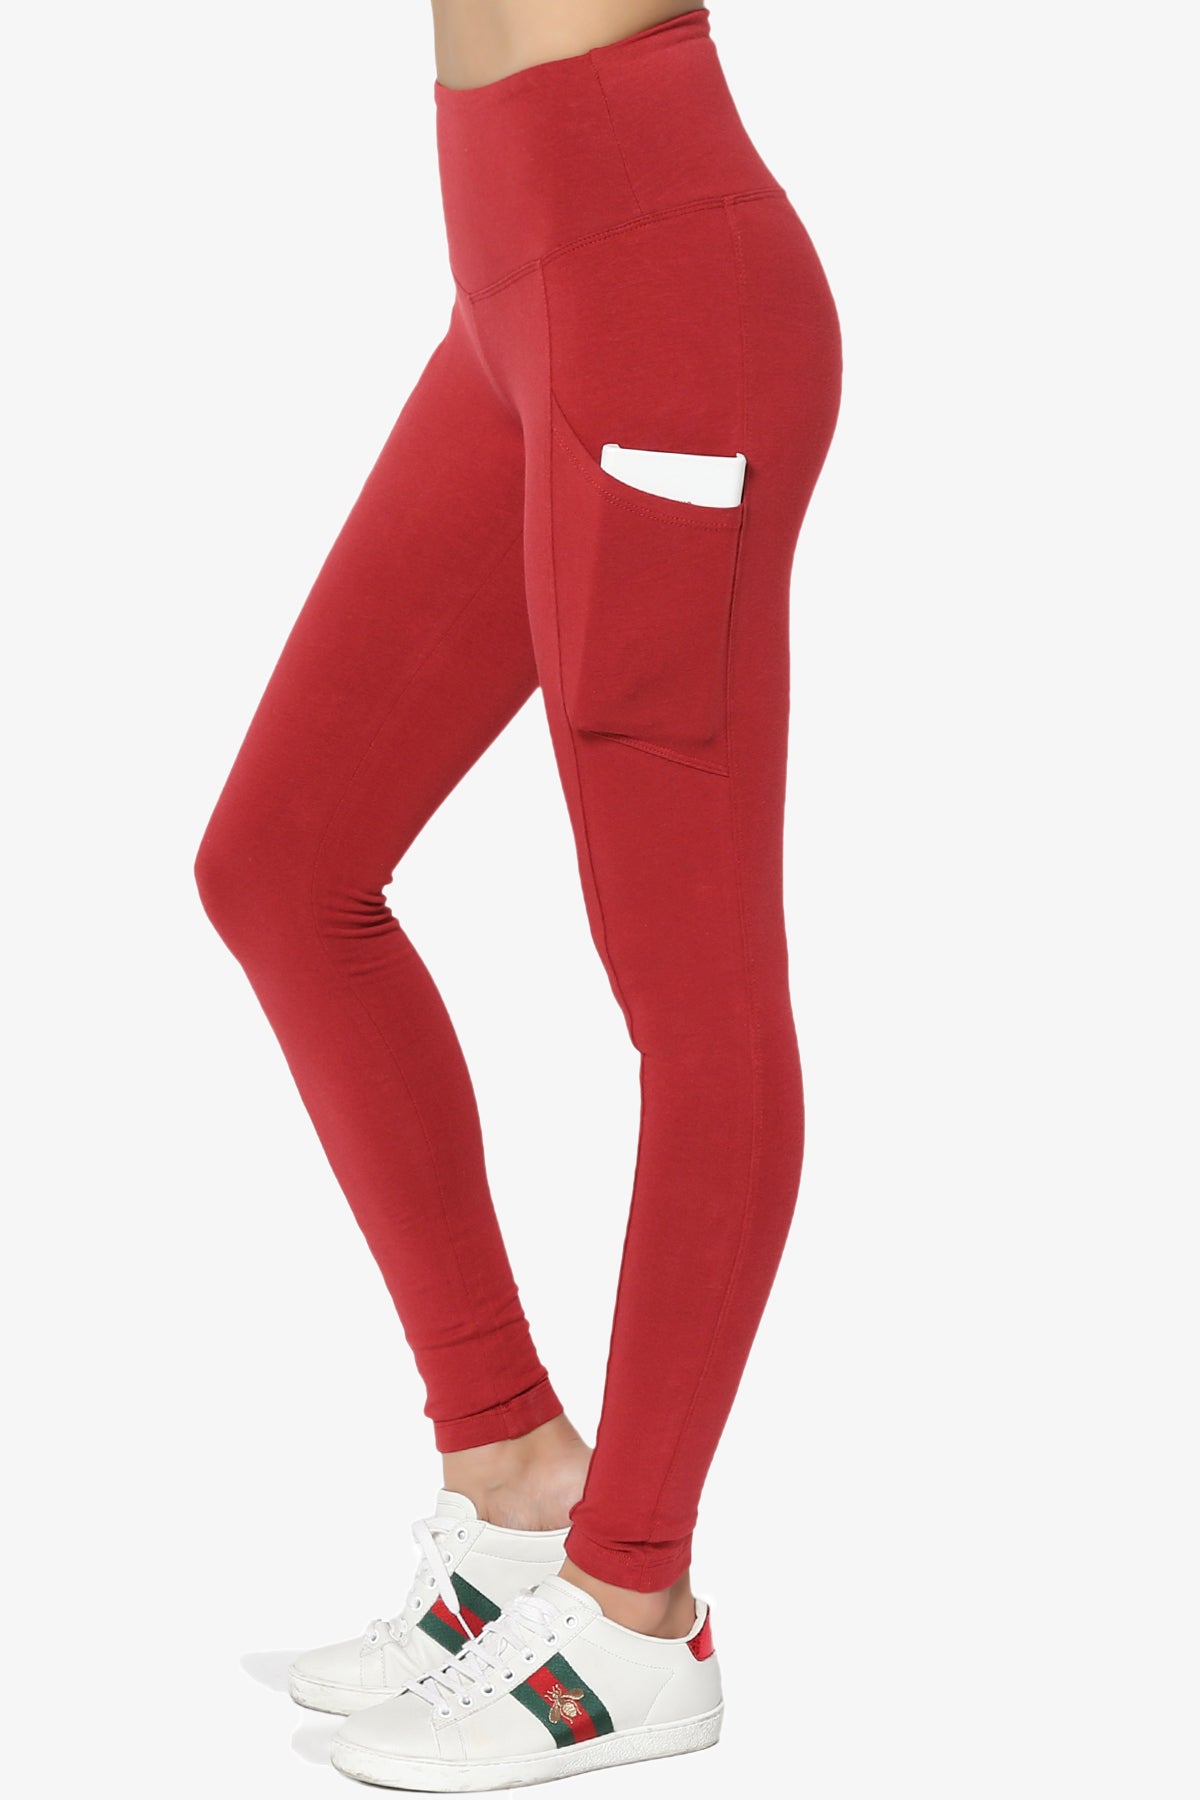 Load image into Gallery viewer, Ansley Luxe Cotton Leggings with Pockets DARK RED_1
